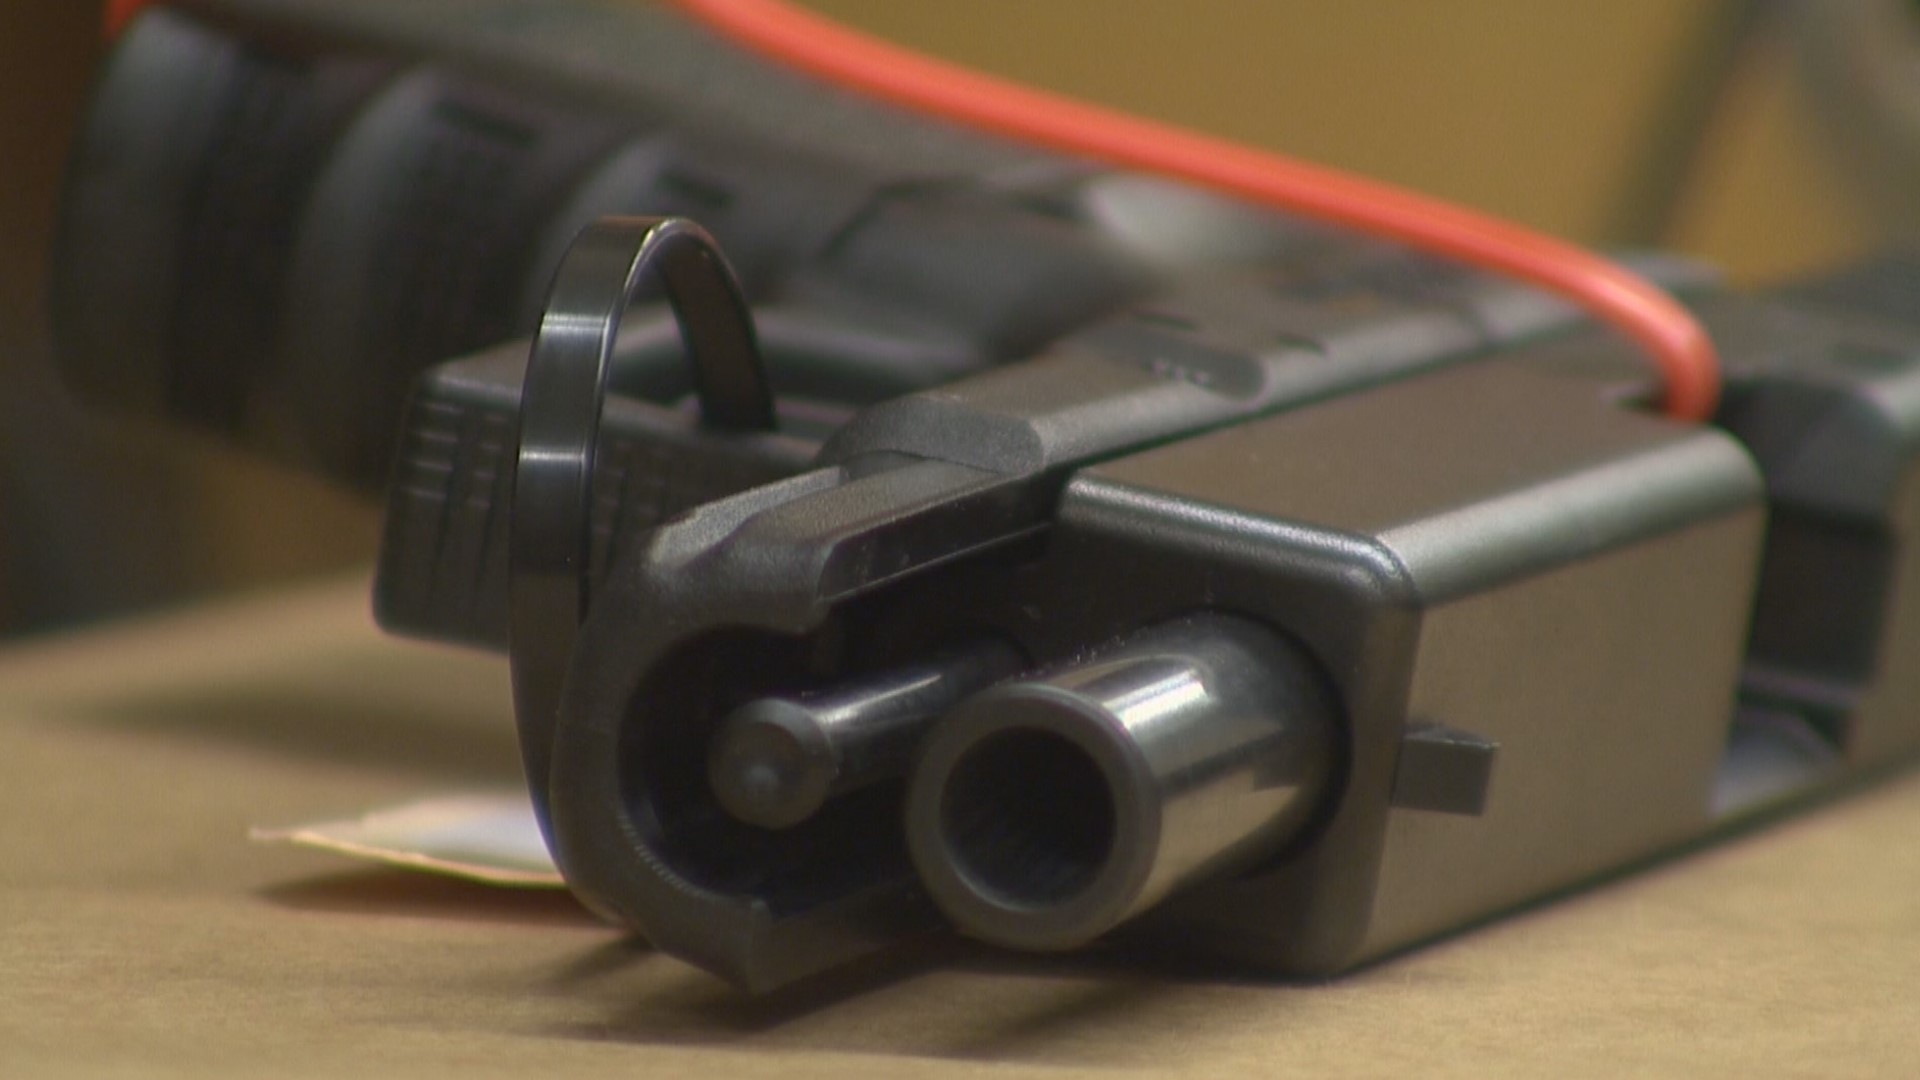 ATF recently released a sweeping federal gun crime report, and Washington lawmakers are working to tackle many of the issues in the current legislative session.